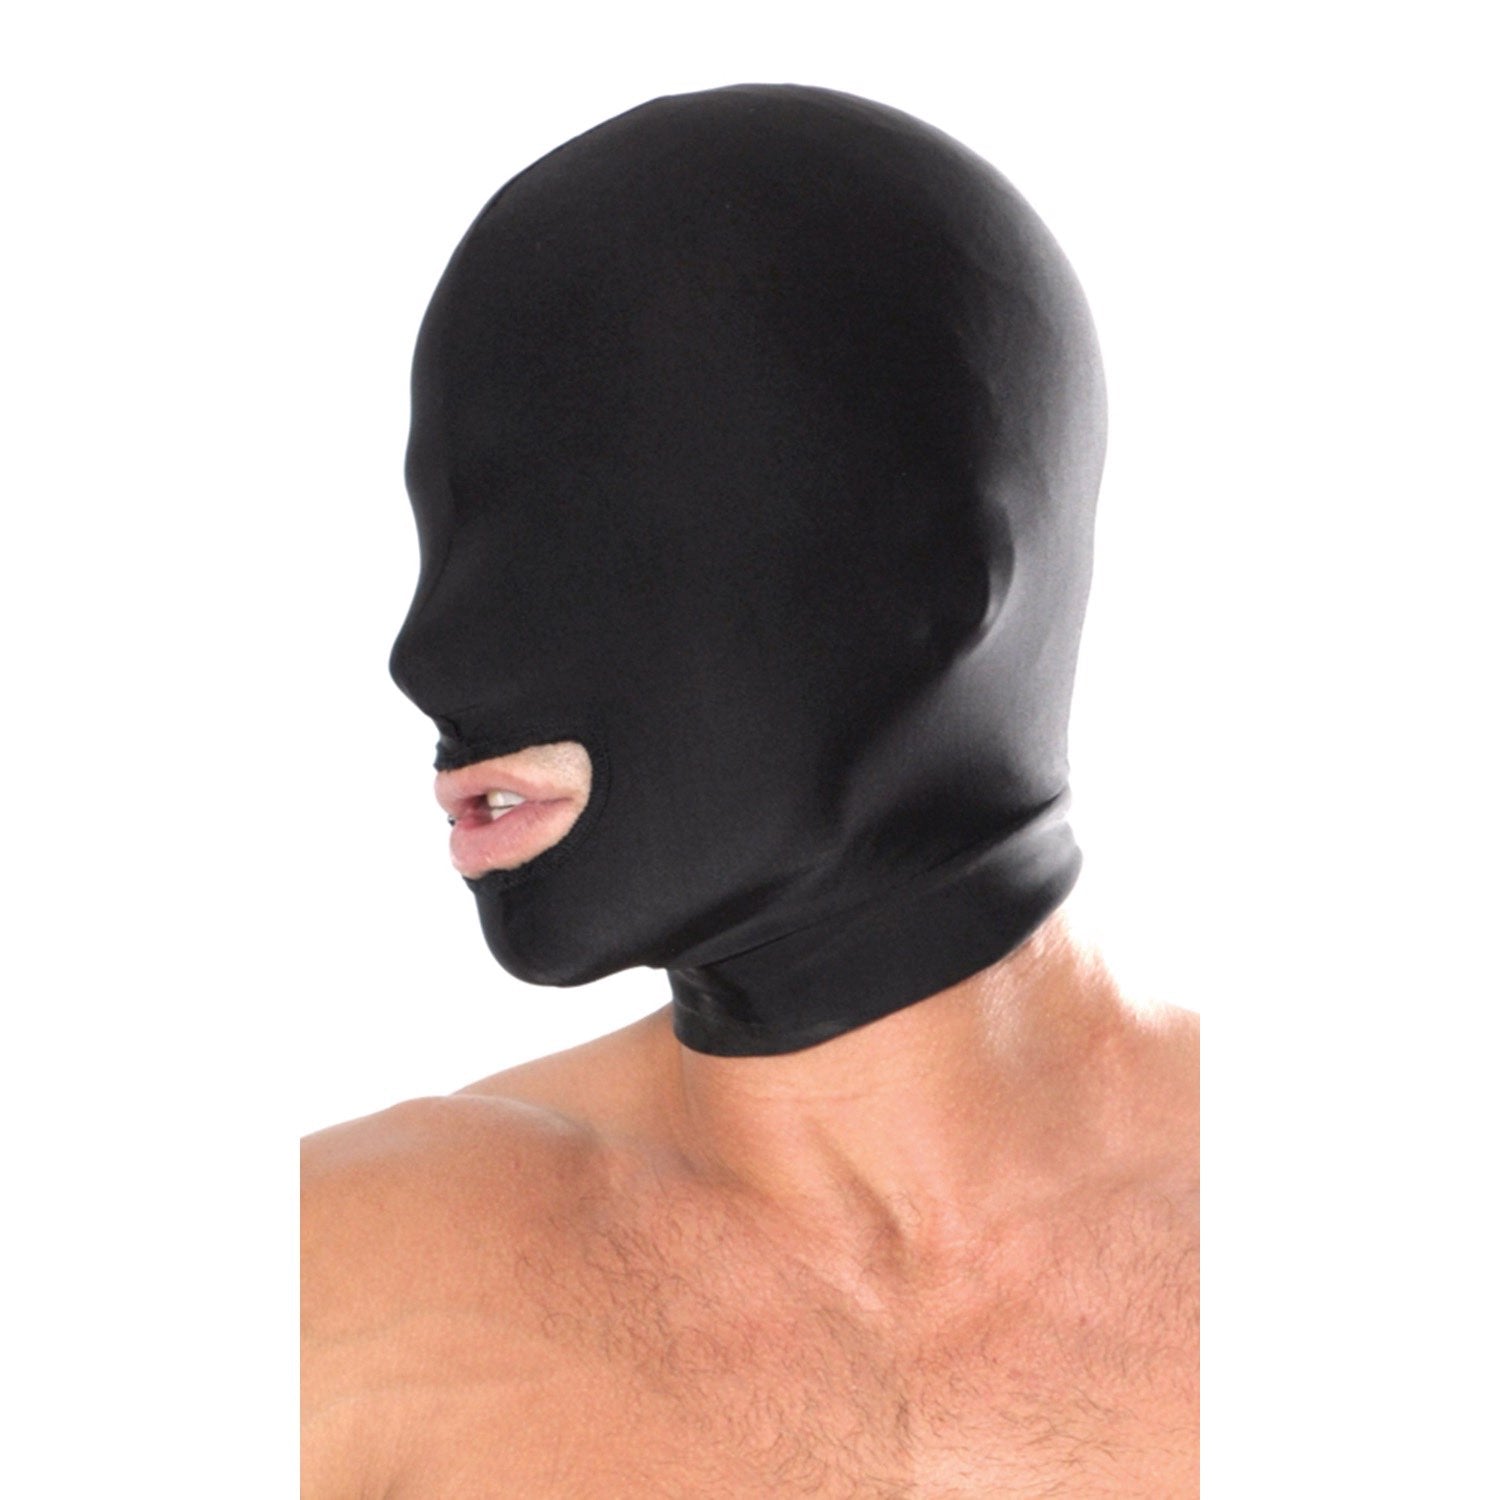 Fetish Fantasy Series Spandex Open-Mouth Hood - Black Hood by Pipedream